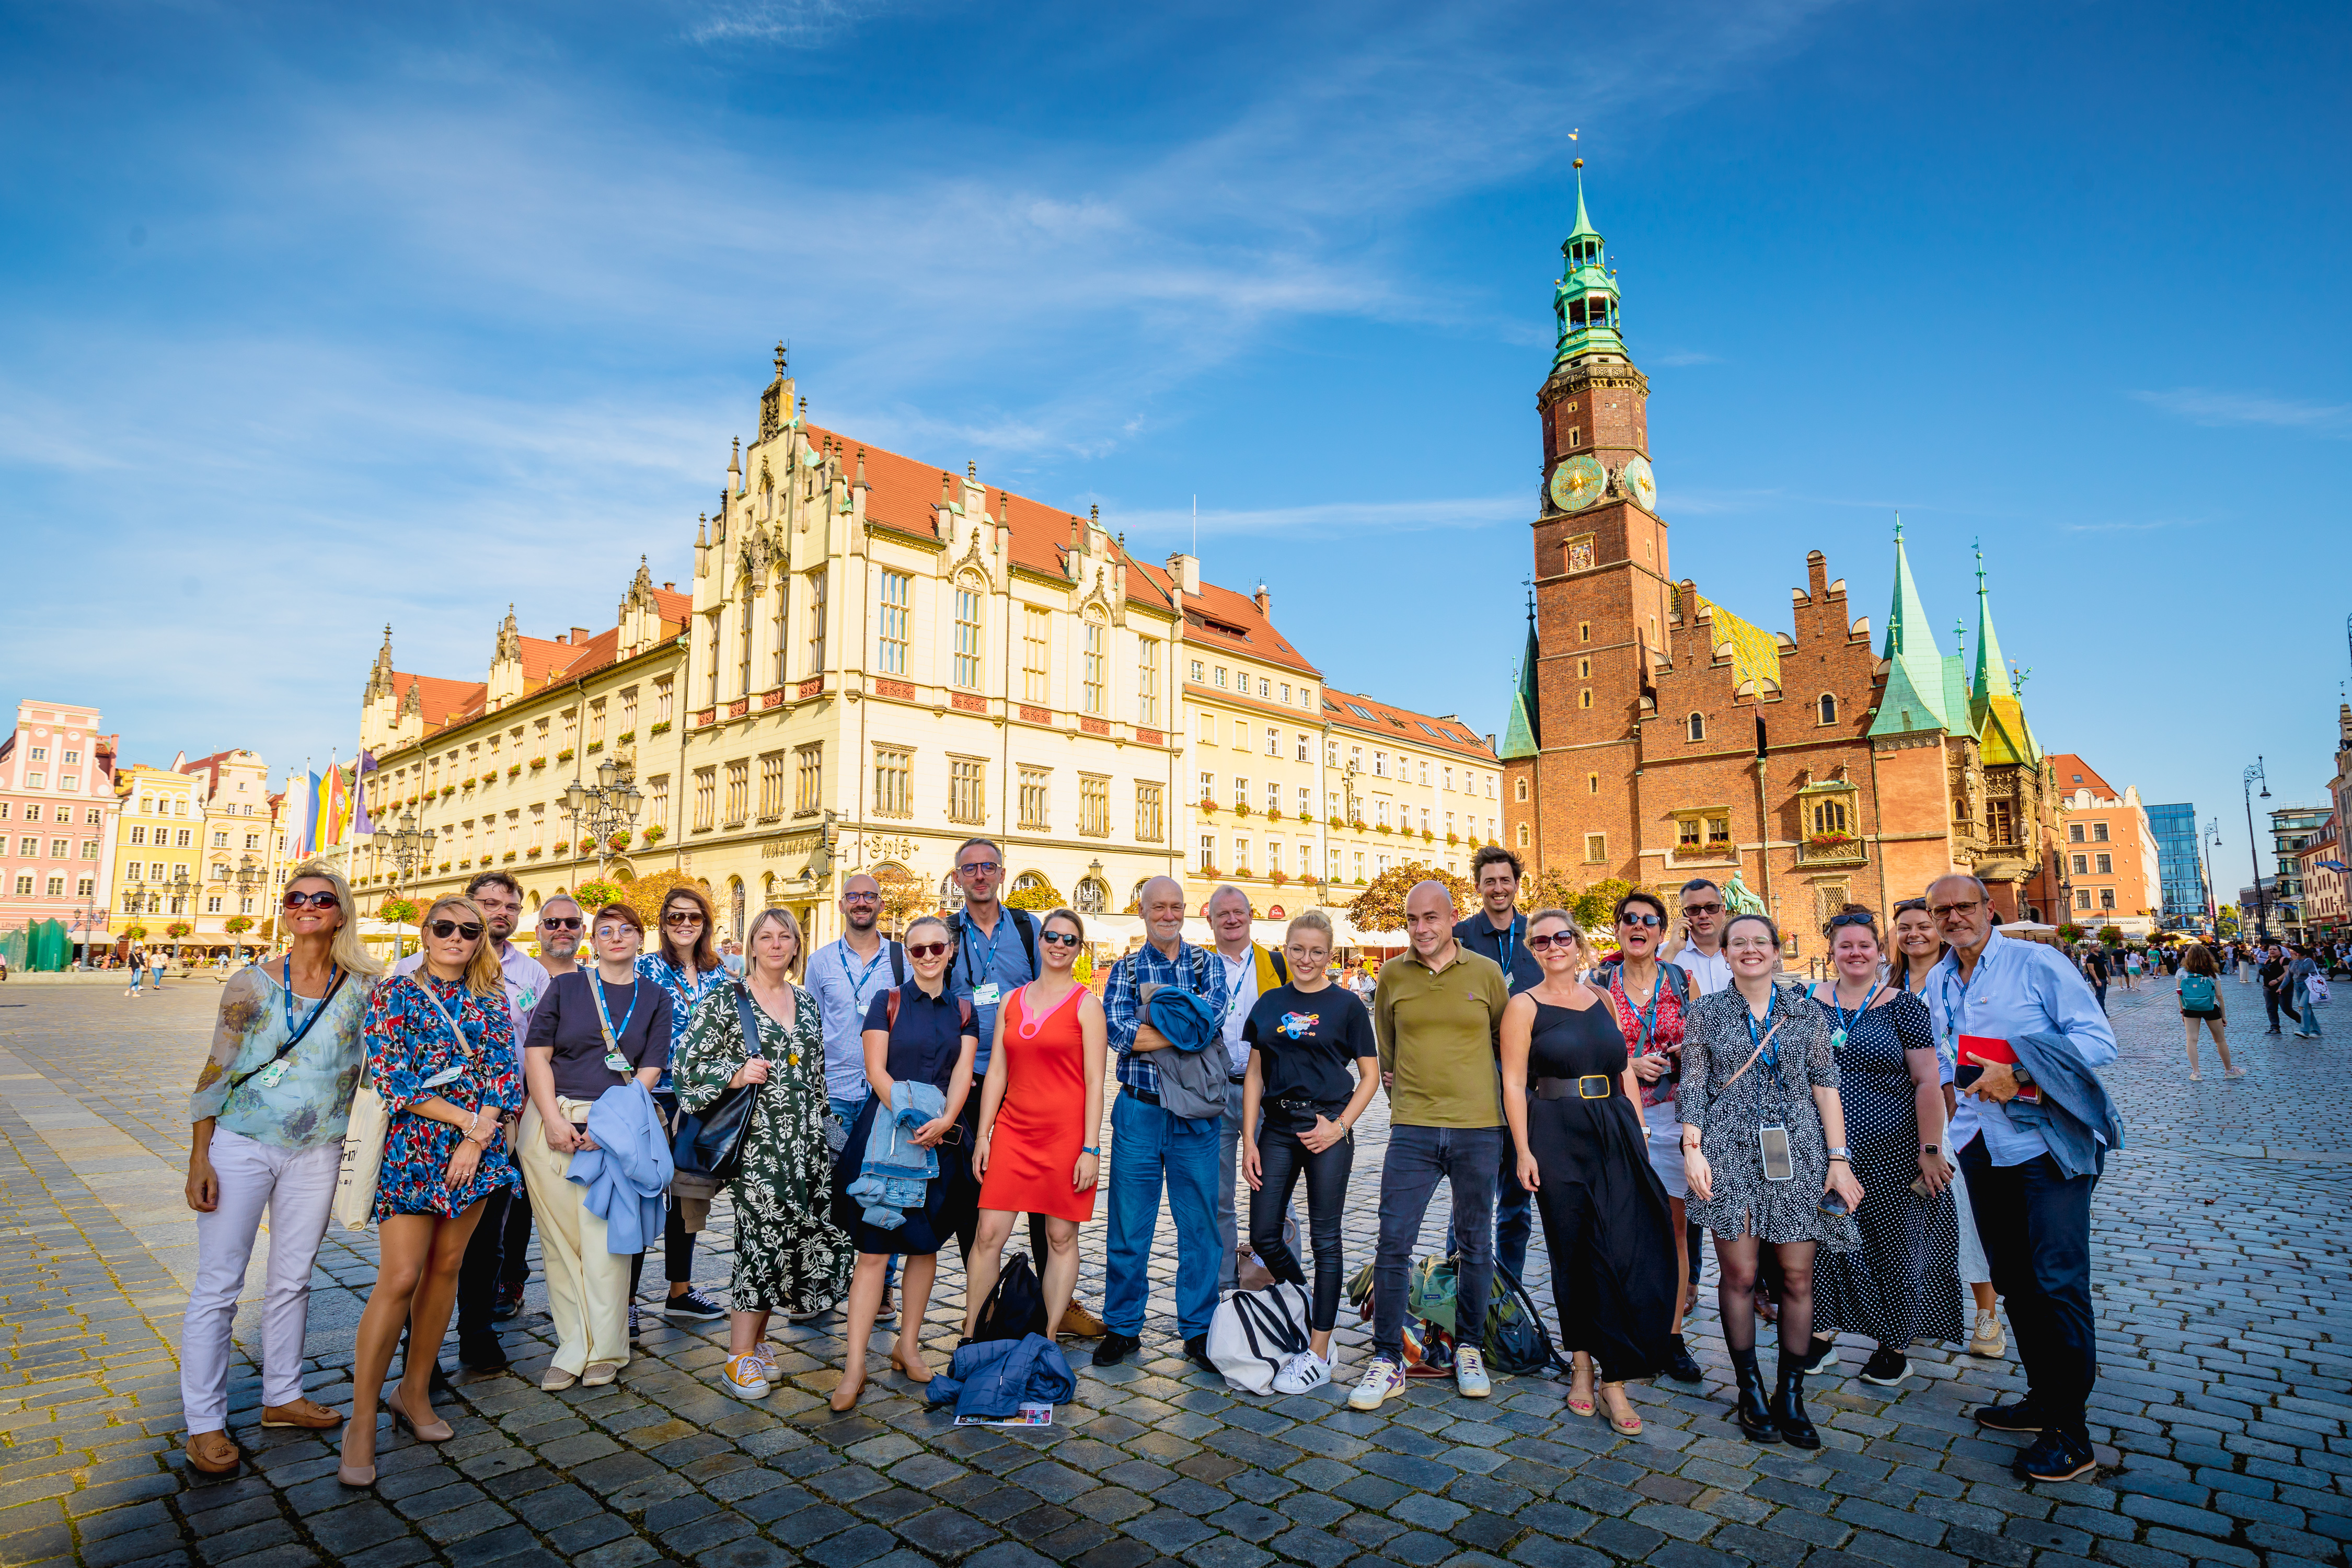 a group of people standing on the Market Square in Wrocław